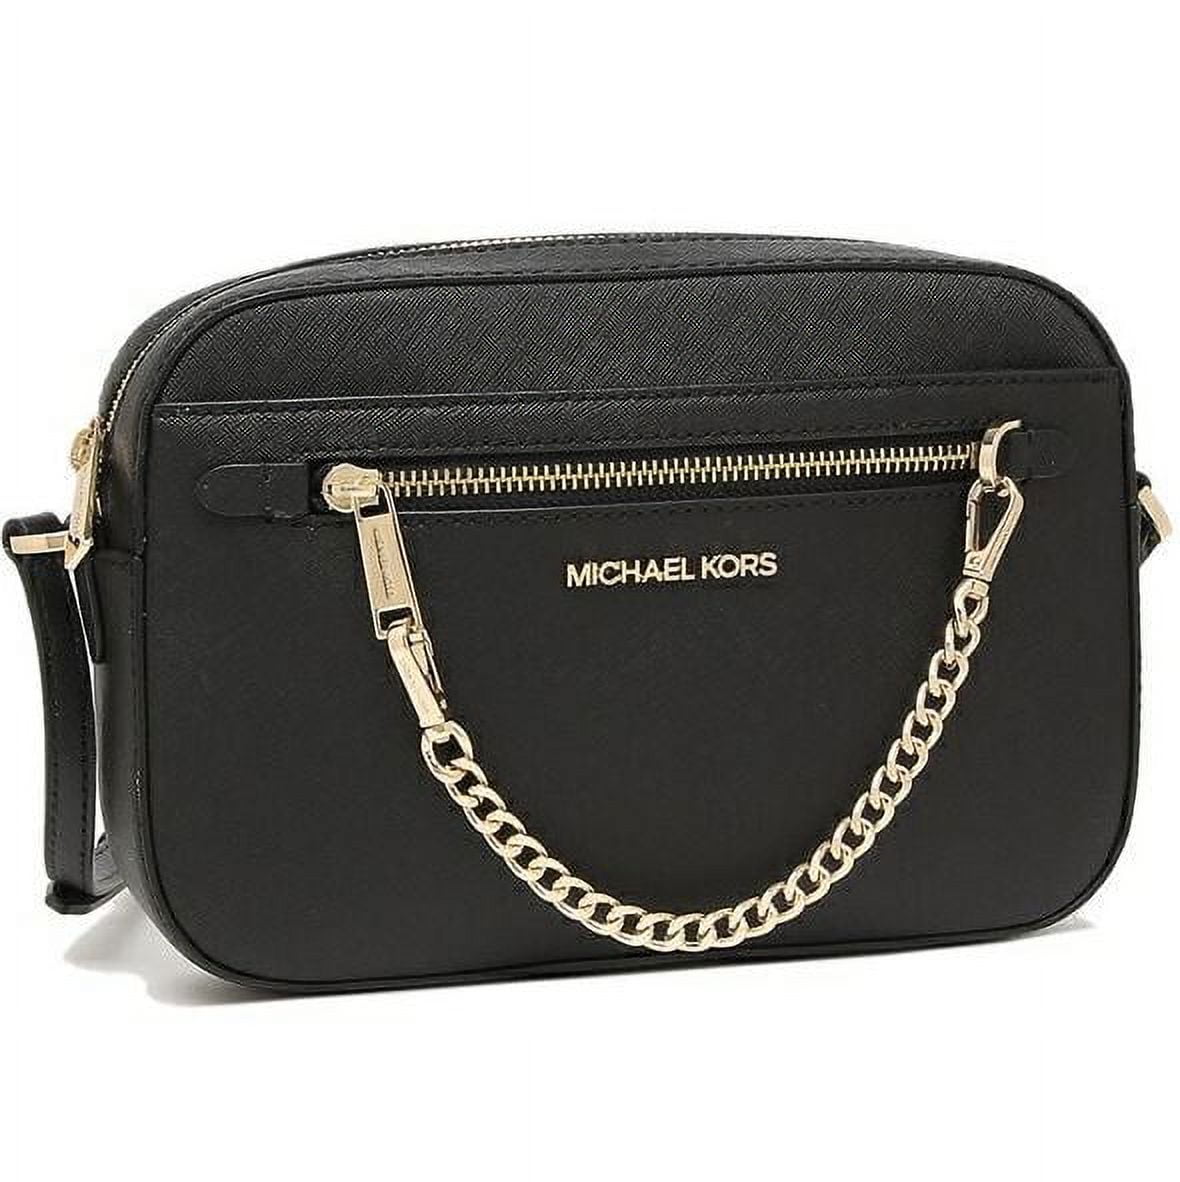 Michael Kors Jet Set Small Pebbled Leather Double-Zip Studded Strap Camera Crossbody Bag - Luggage